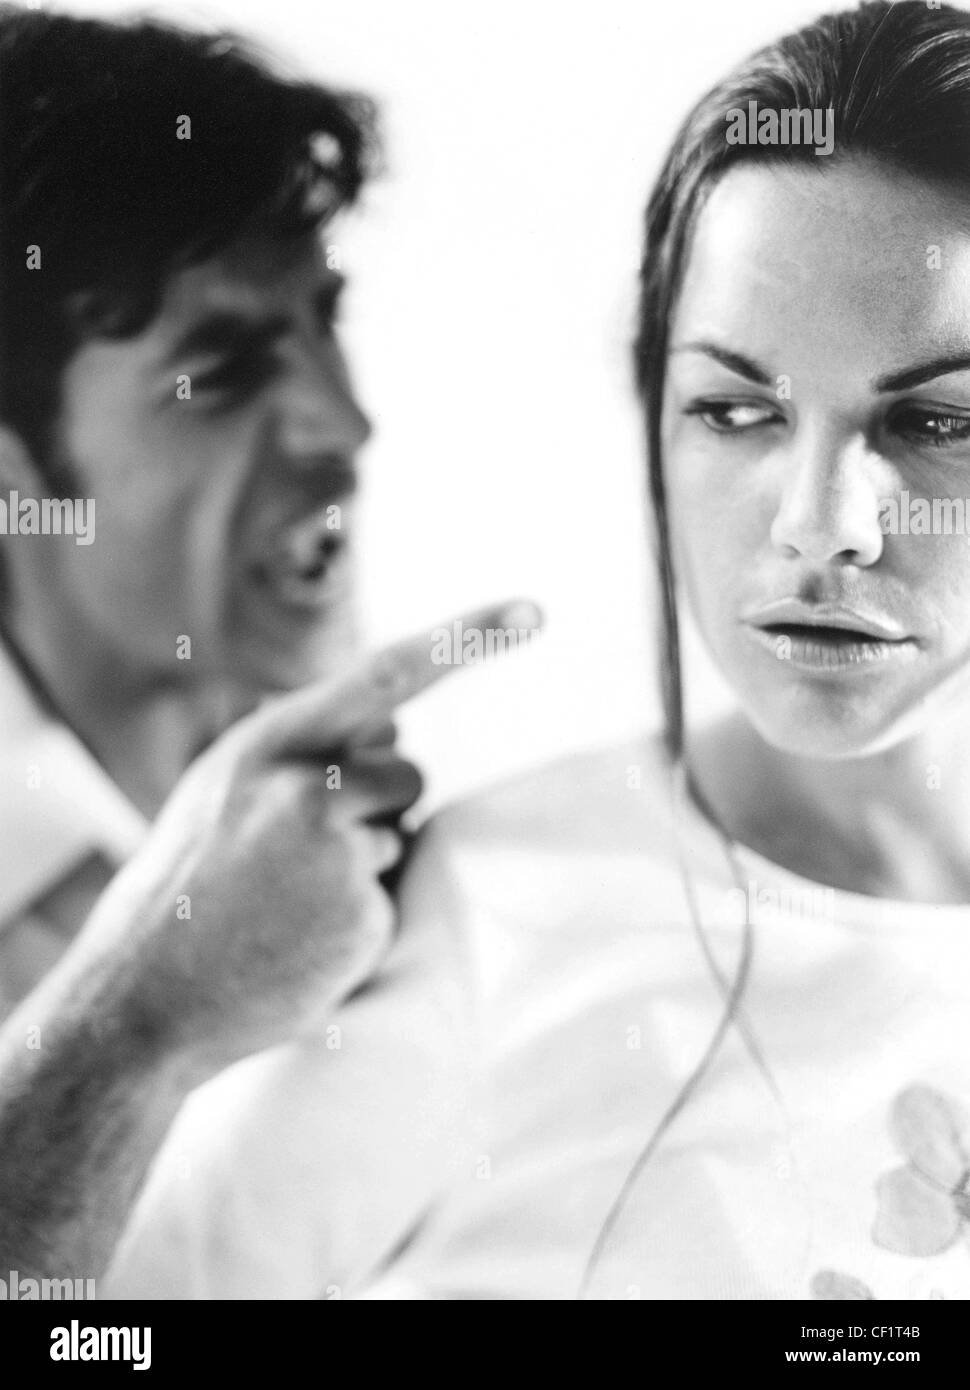 Couple arguing male shouting at female aggressive expression female with back to him looking behind her Stock Photo